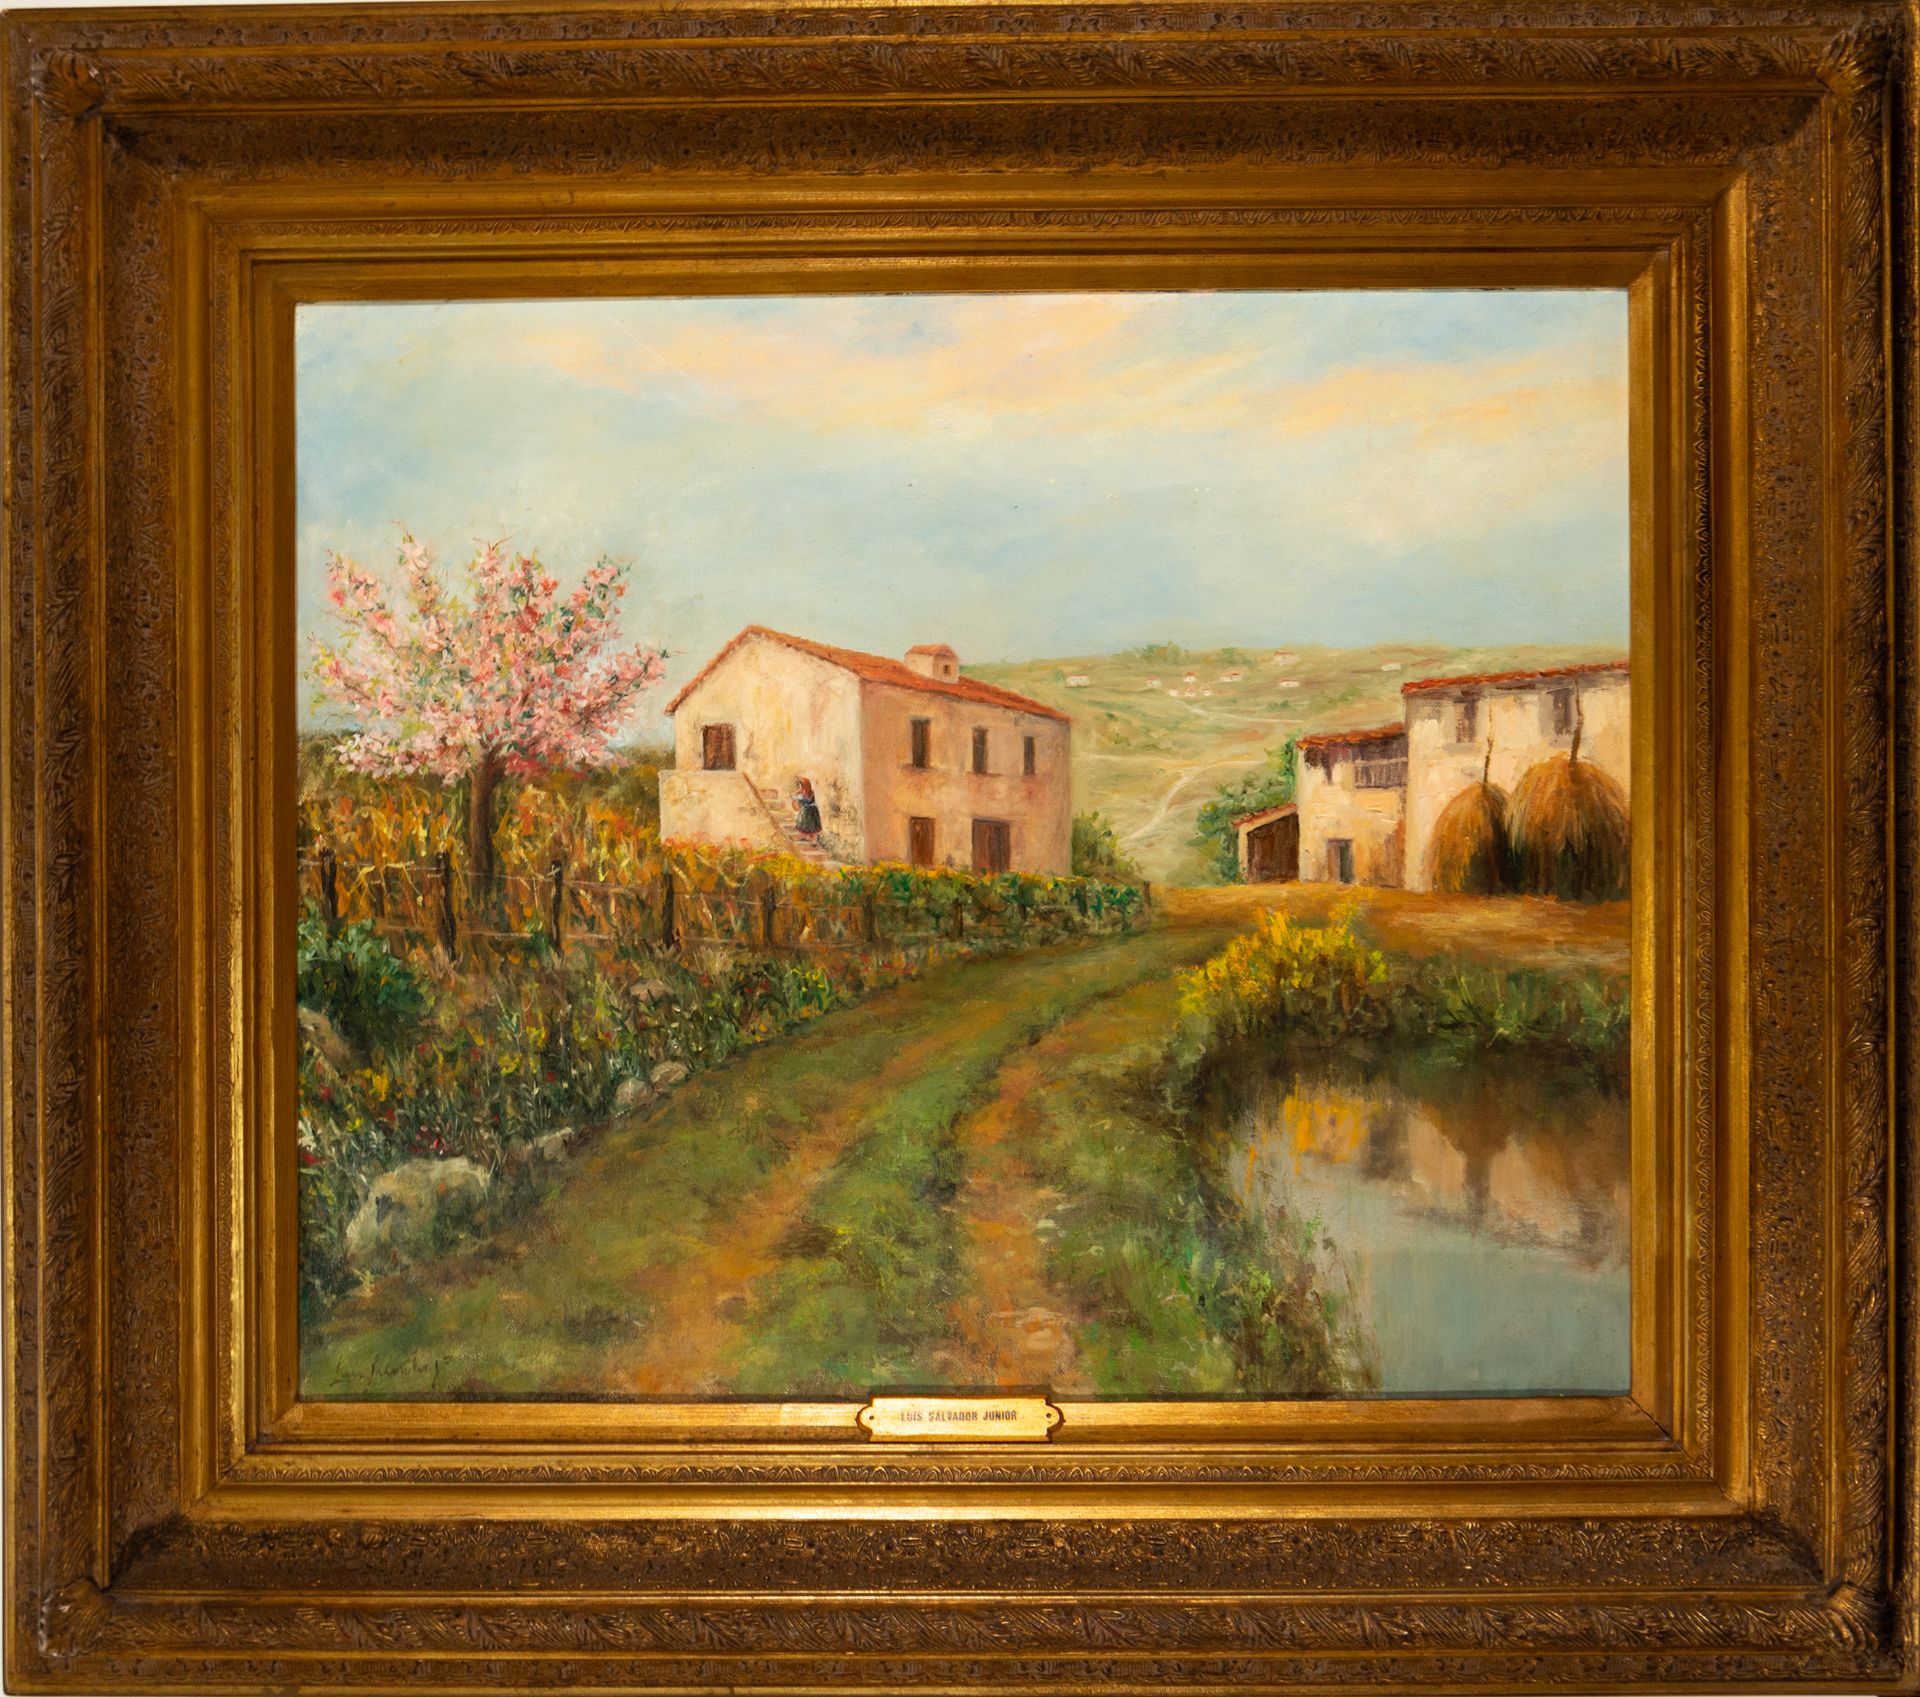 View of the Town, Luis Salvador Junior, Portuguese school of the 20th century